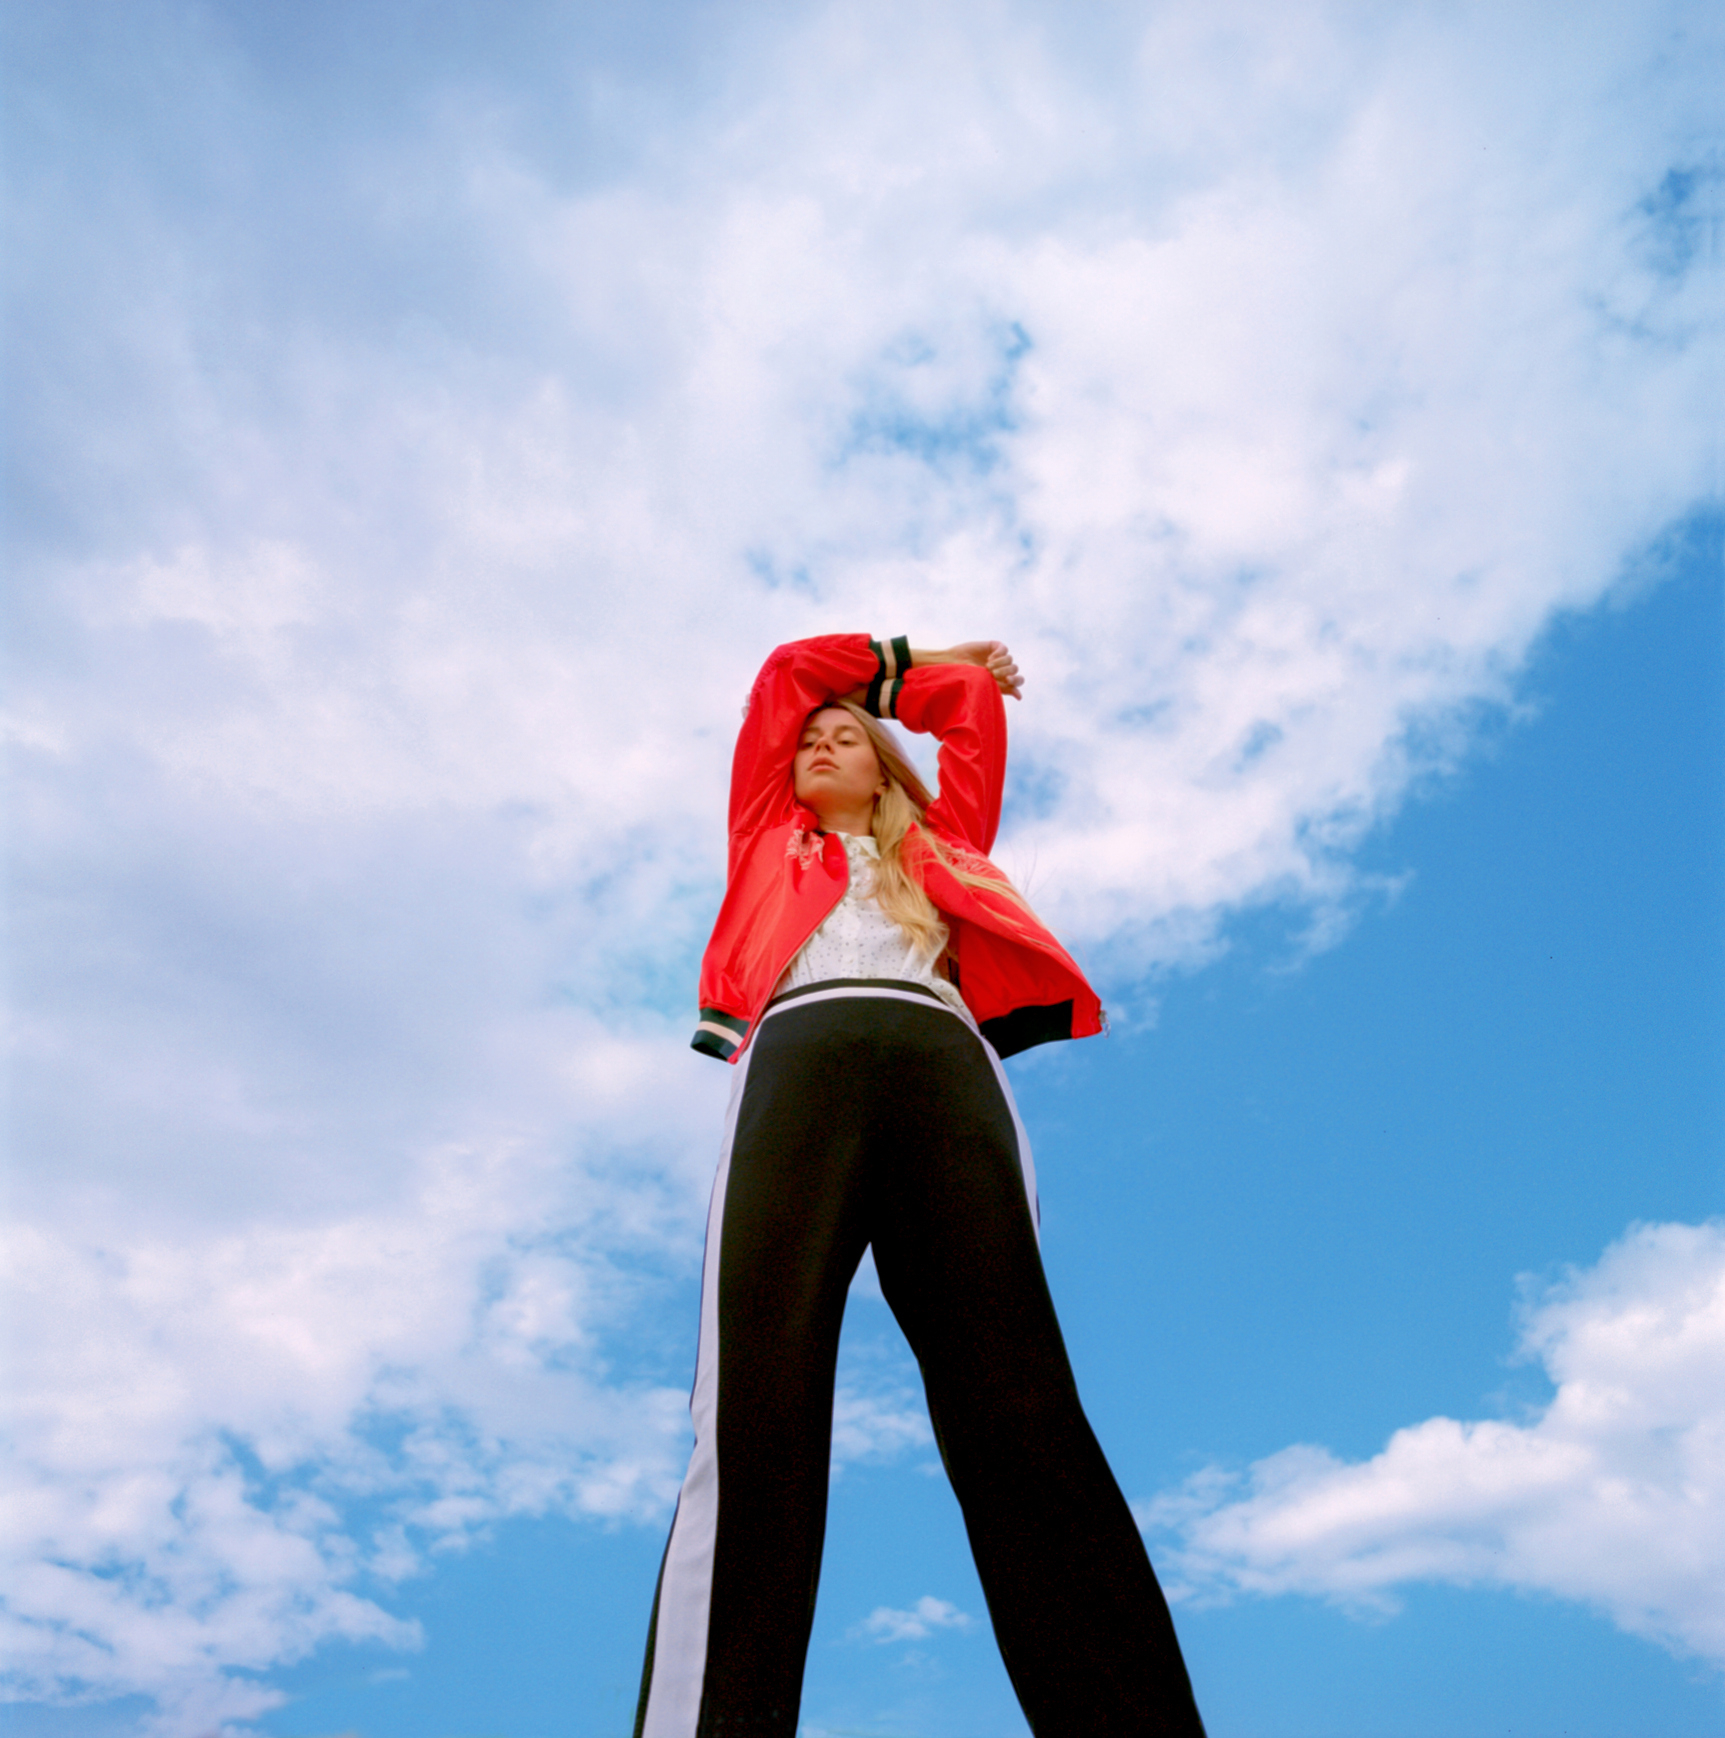 Person in a red jacket and black pants poses against a cloudy sky